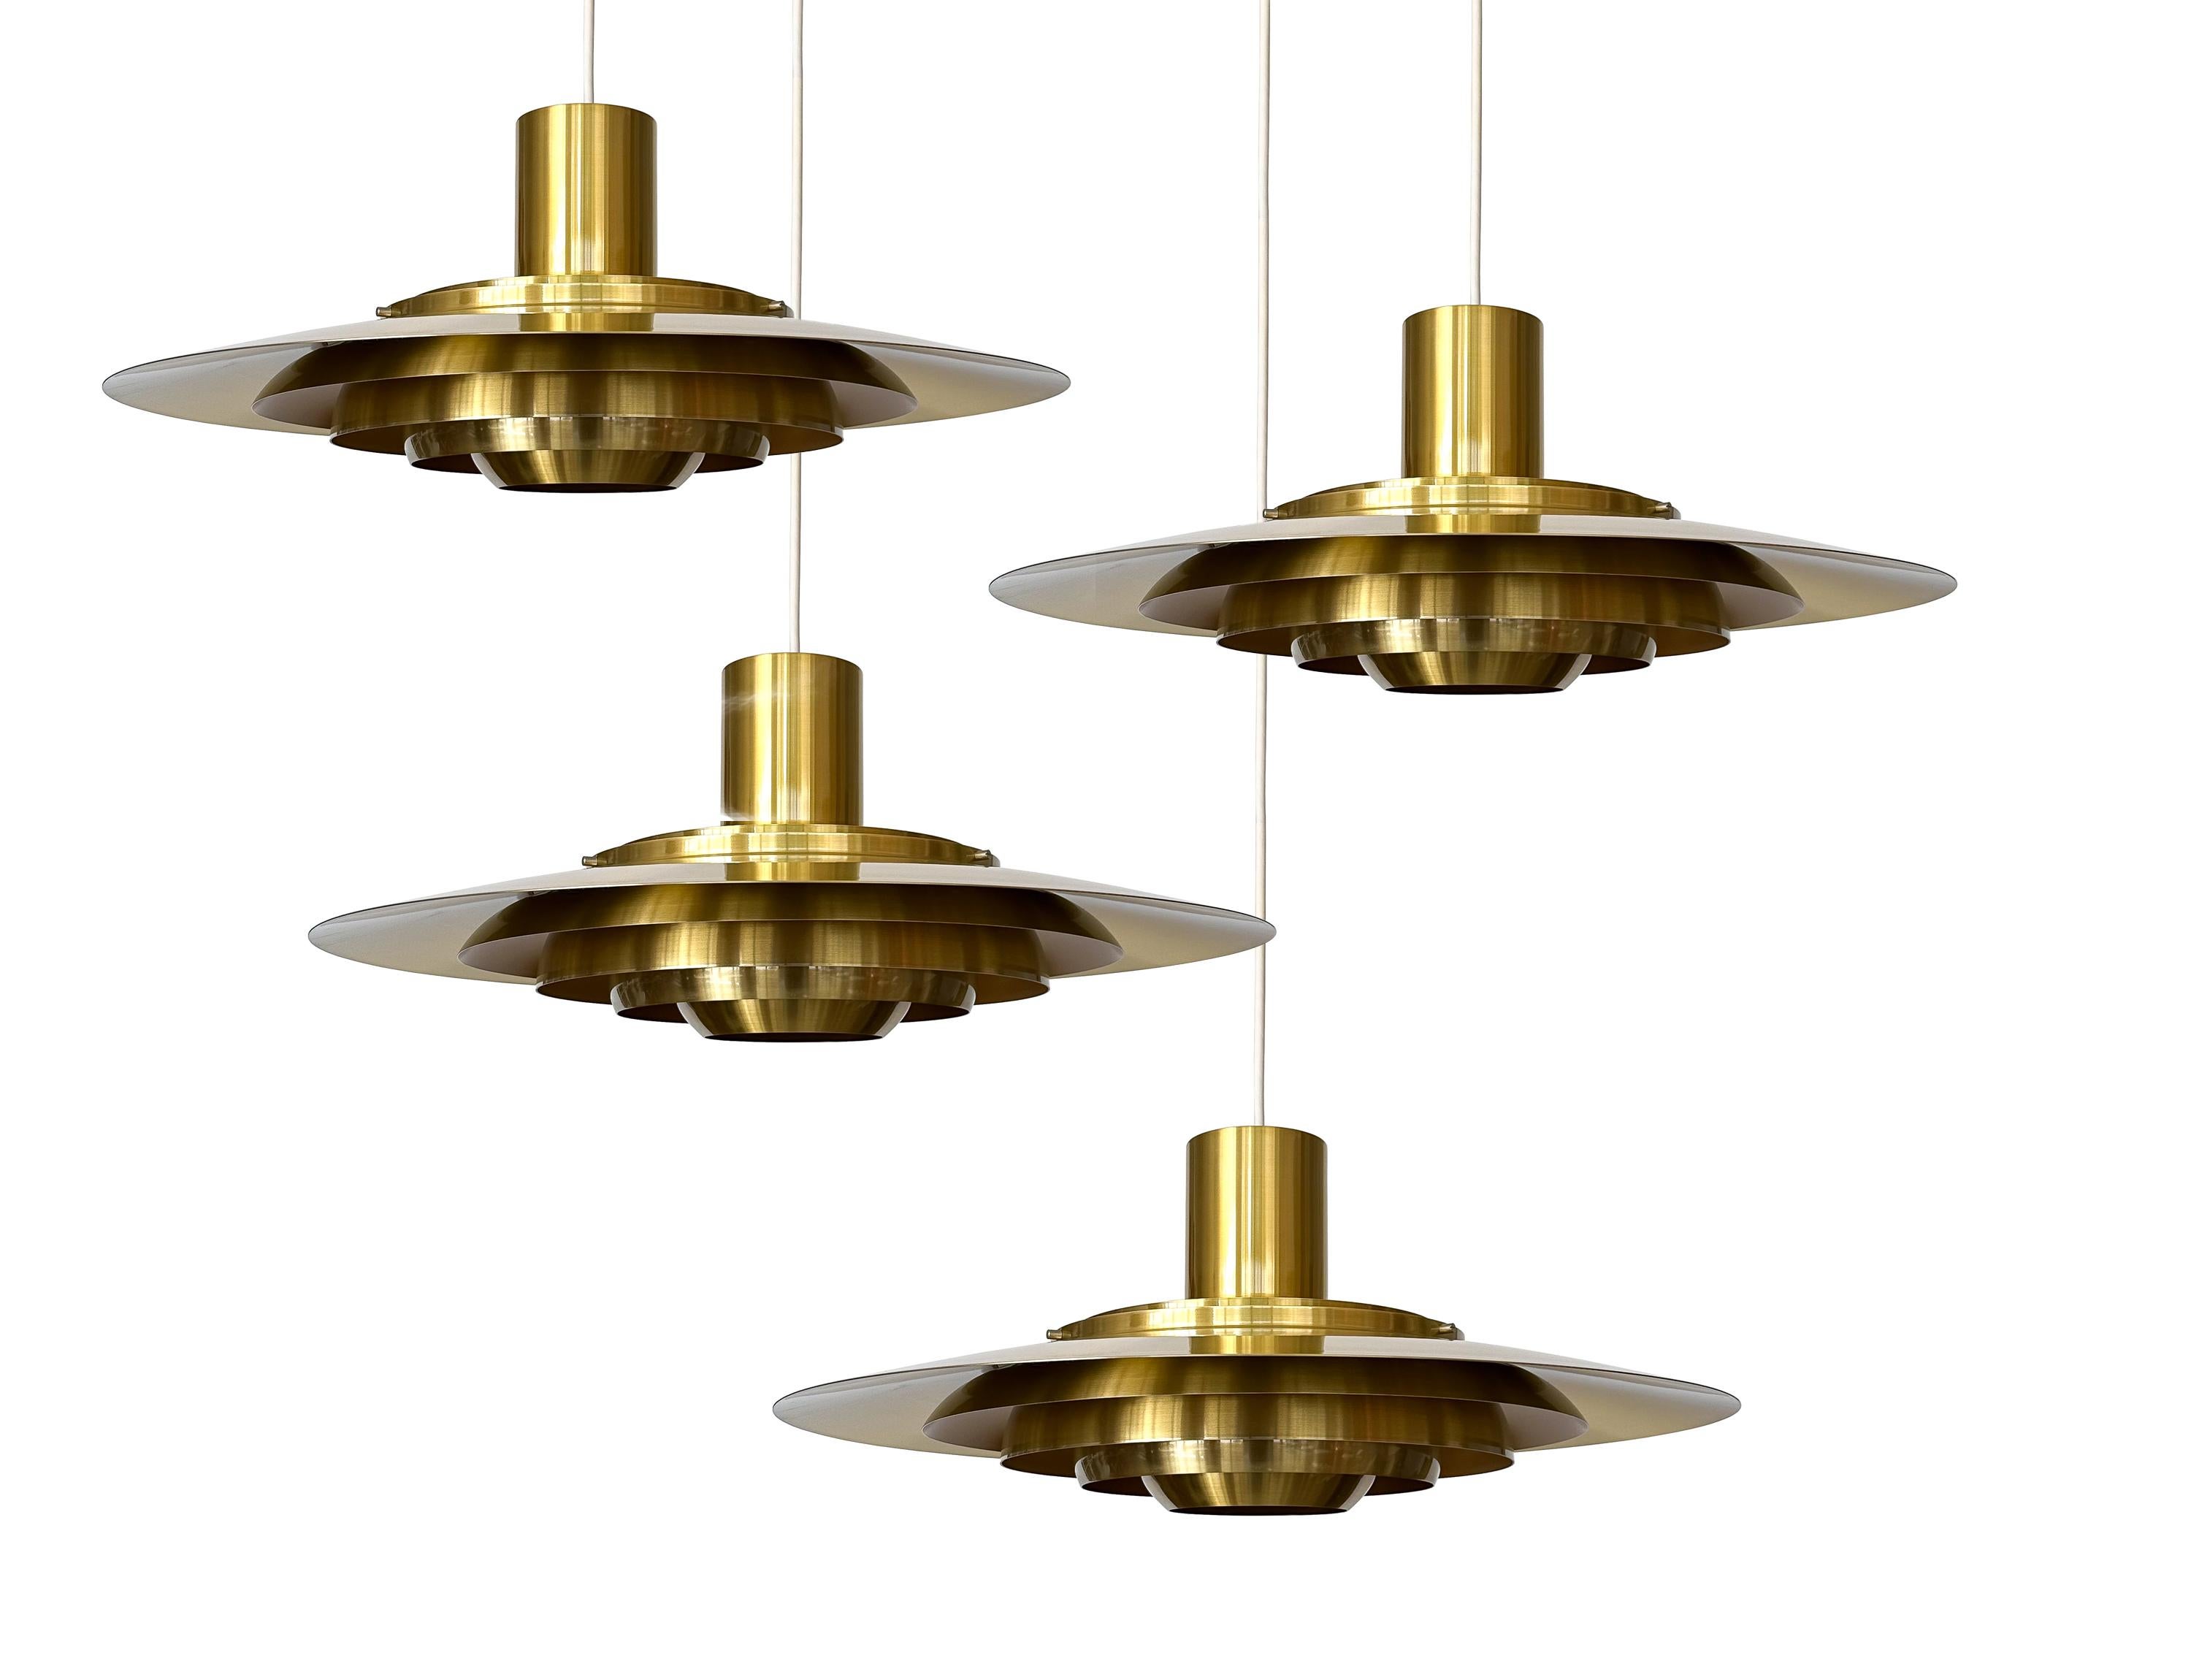 Discover the epitome of Danish sophistication with this extraordinary brass pendant chandelier, designed by the iconic design duo Preben Fabricius and Jorgen Kastholm in 1964 for Nordisk Solar, Denmark circa 1960s. Model 74407 is a grand presence